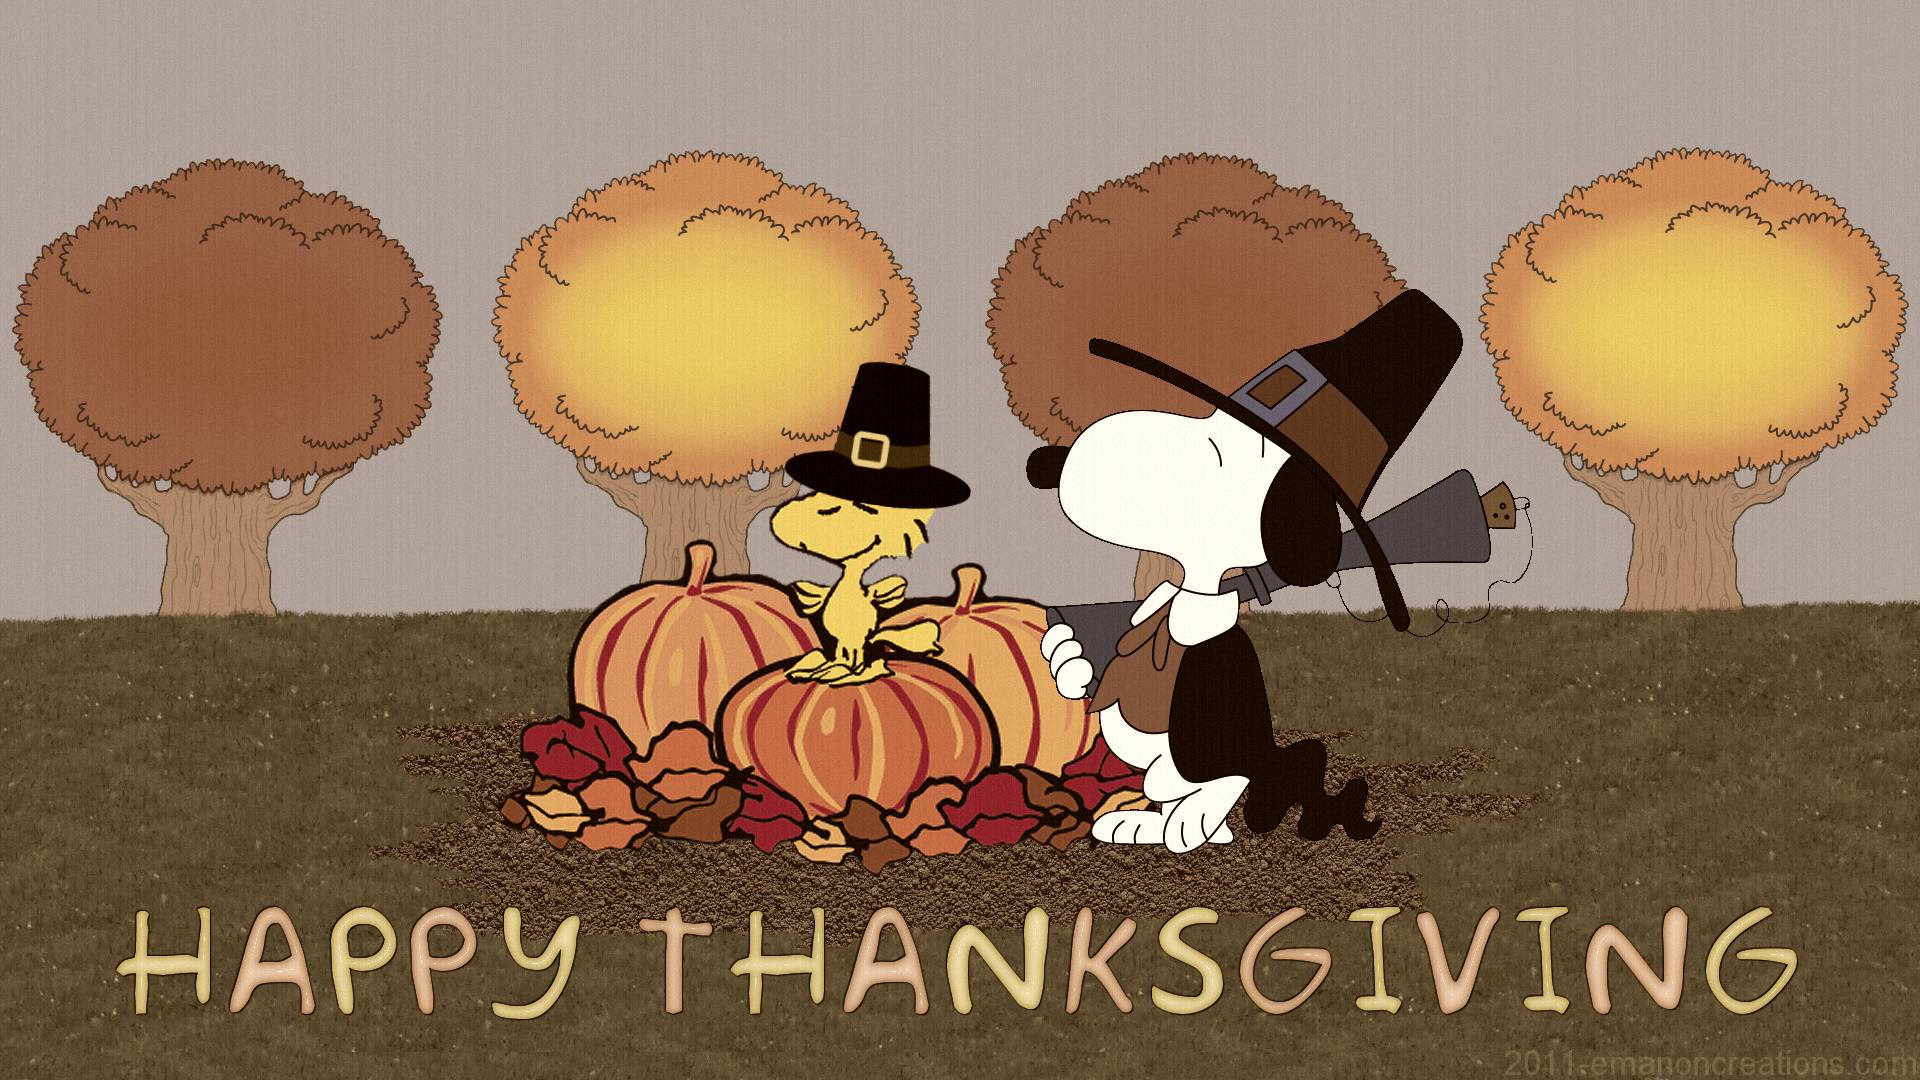 Peanuts Thanksgiving Wallpapers Top Free Peanuts Thanksgiving Backgrounds Wallpaperaccess